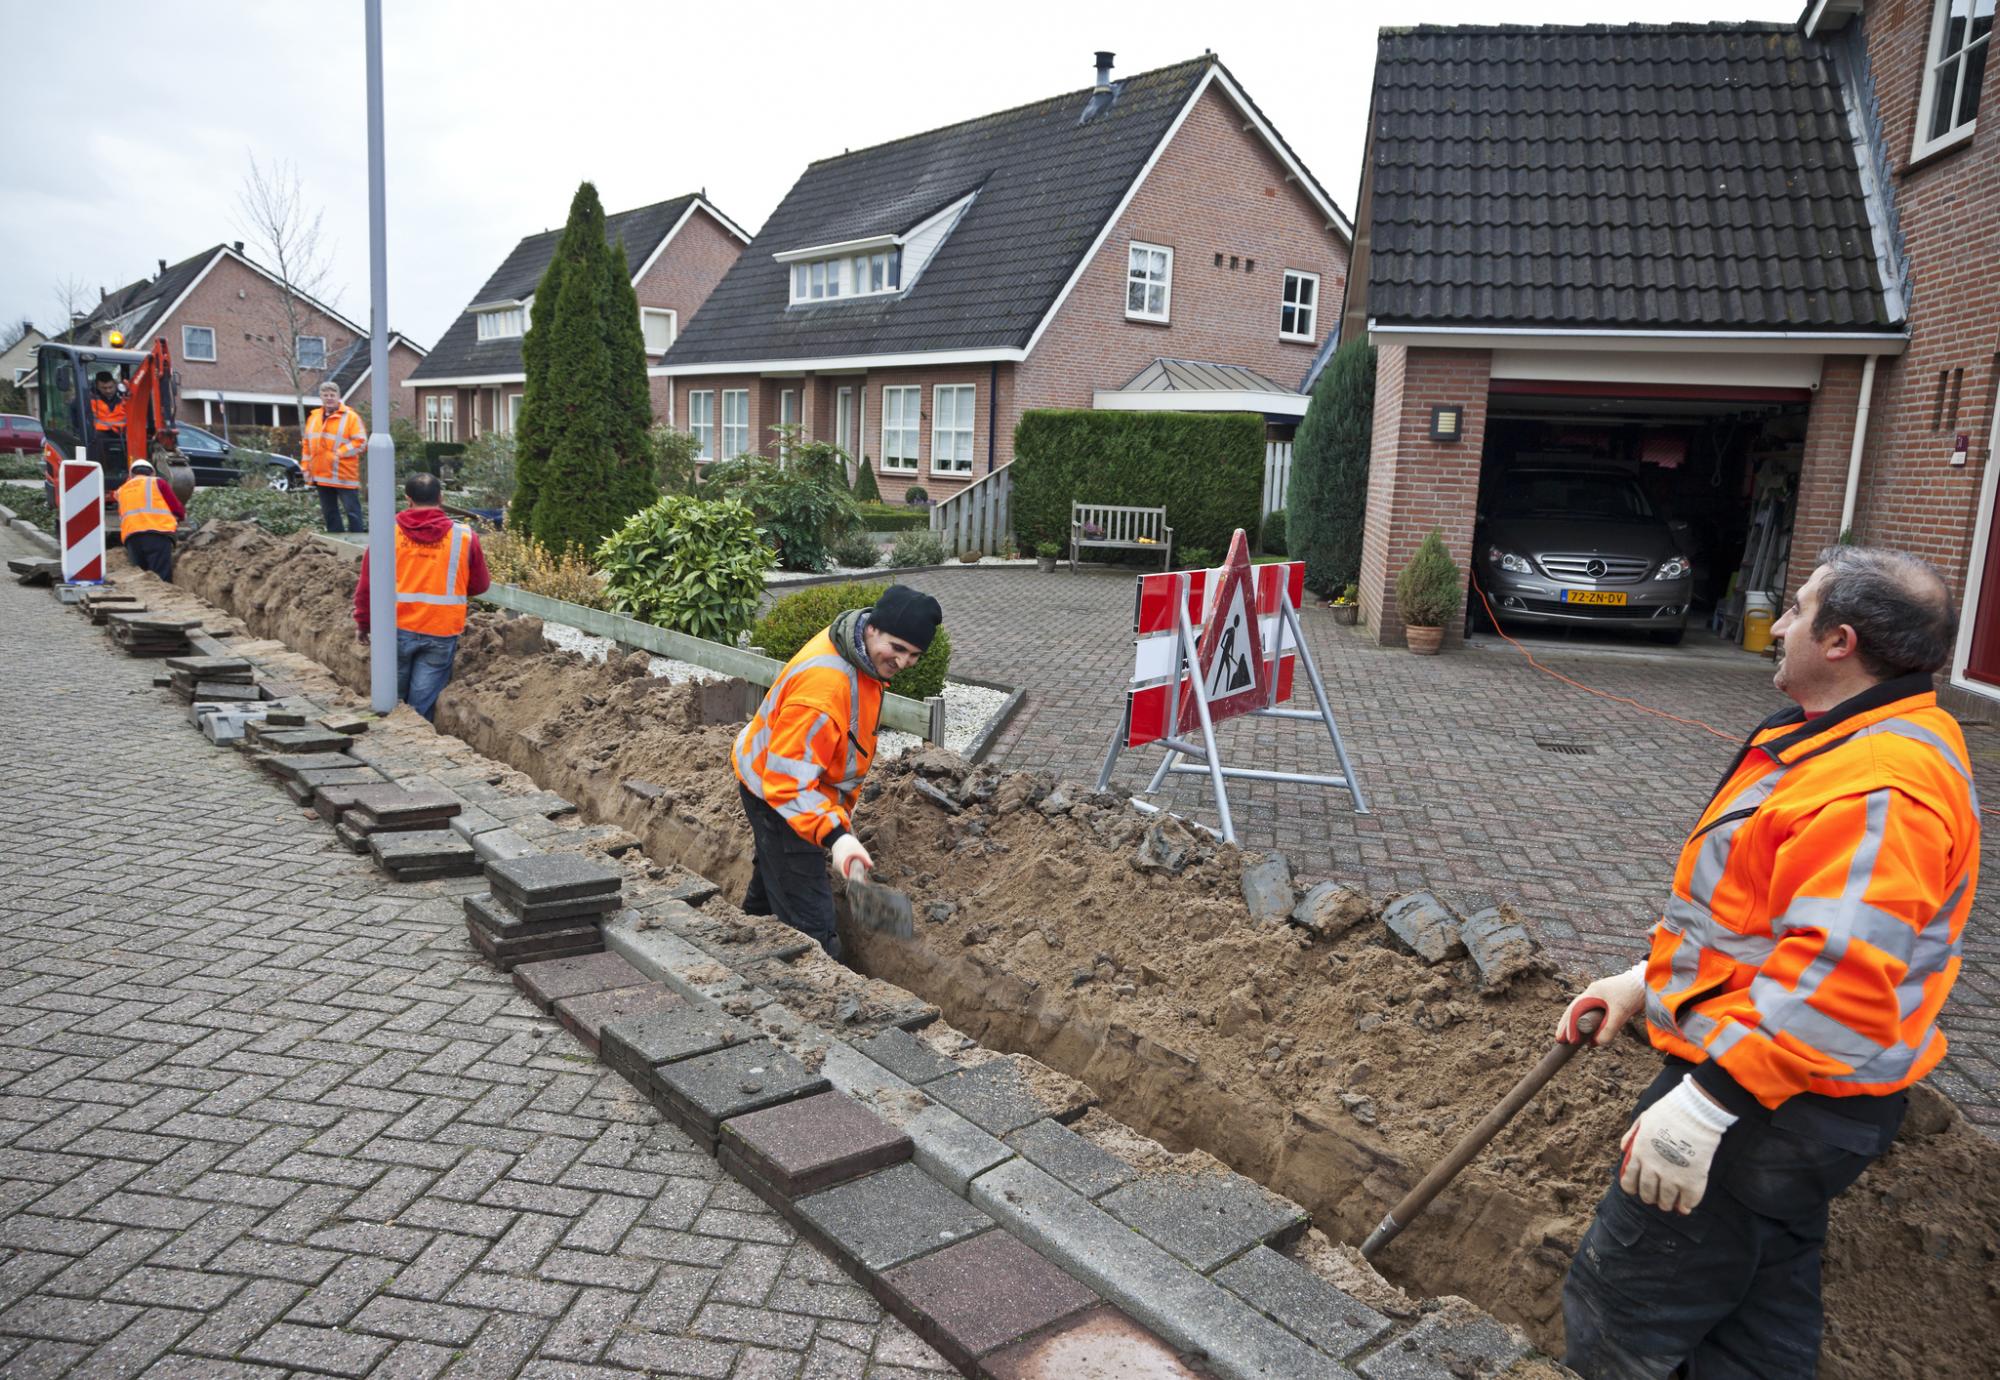 Workmen bring up pavement to lay fibre optic cables.